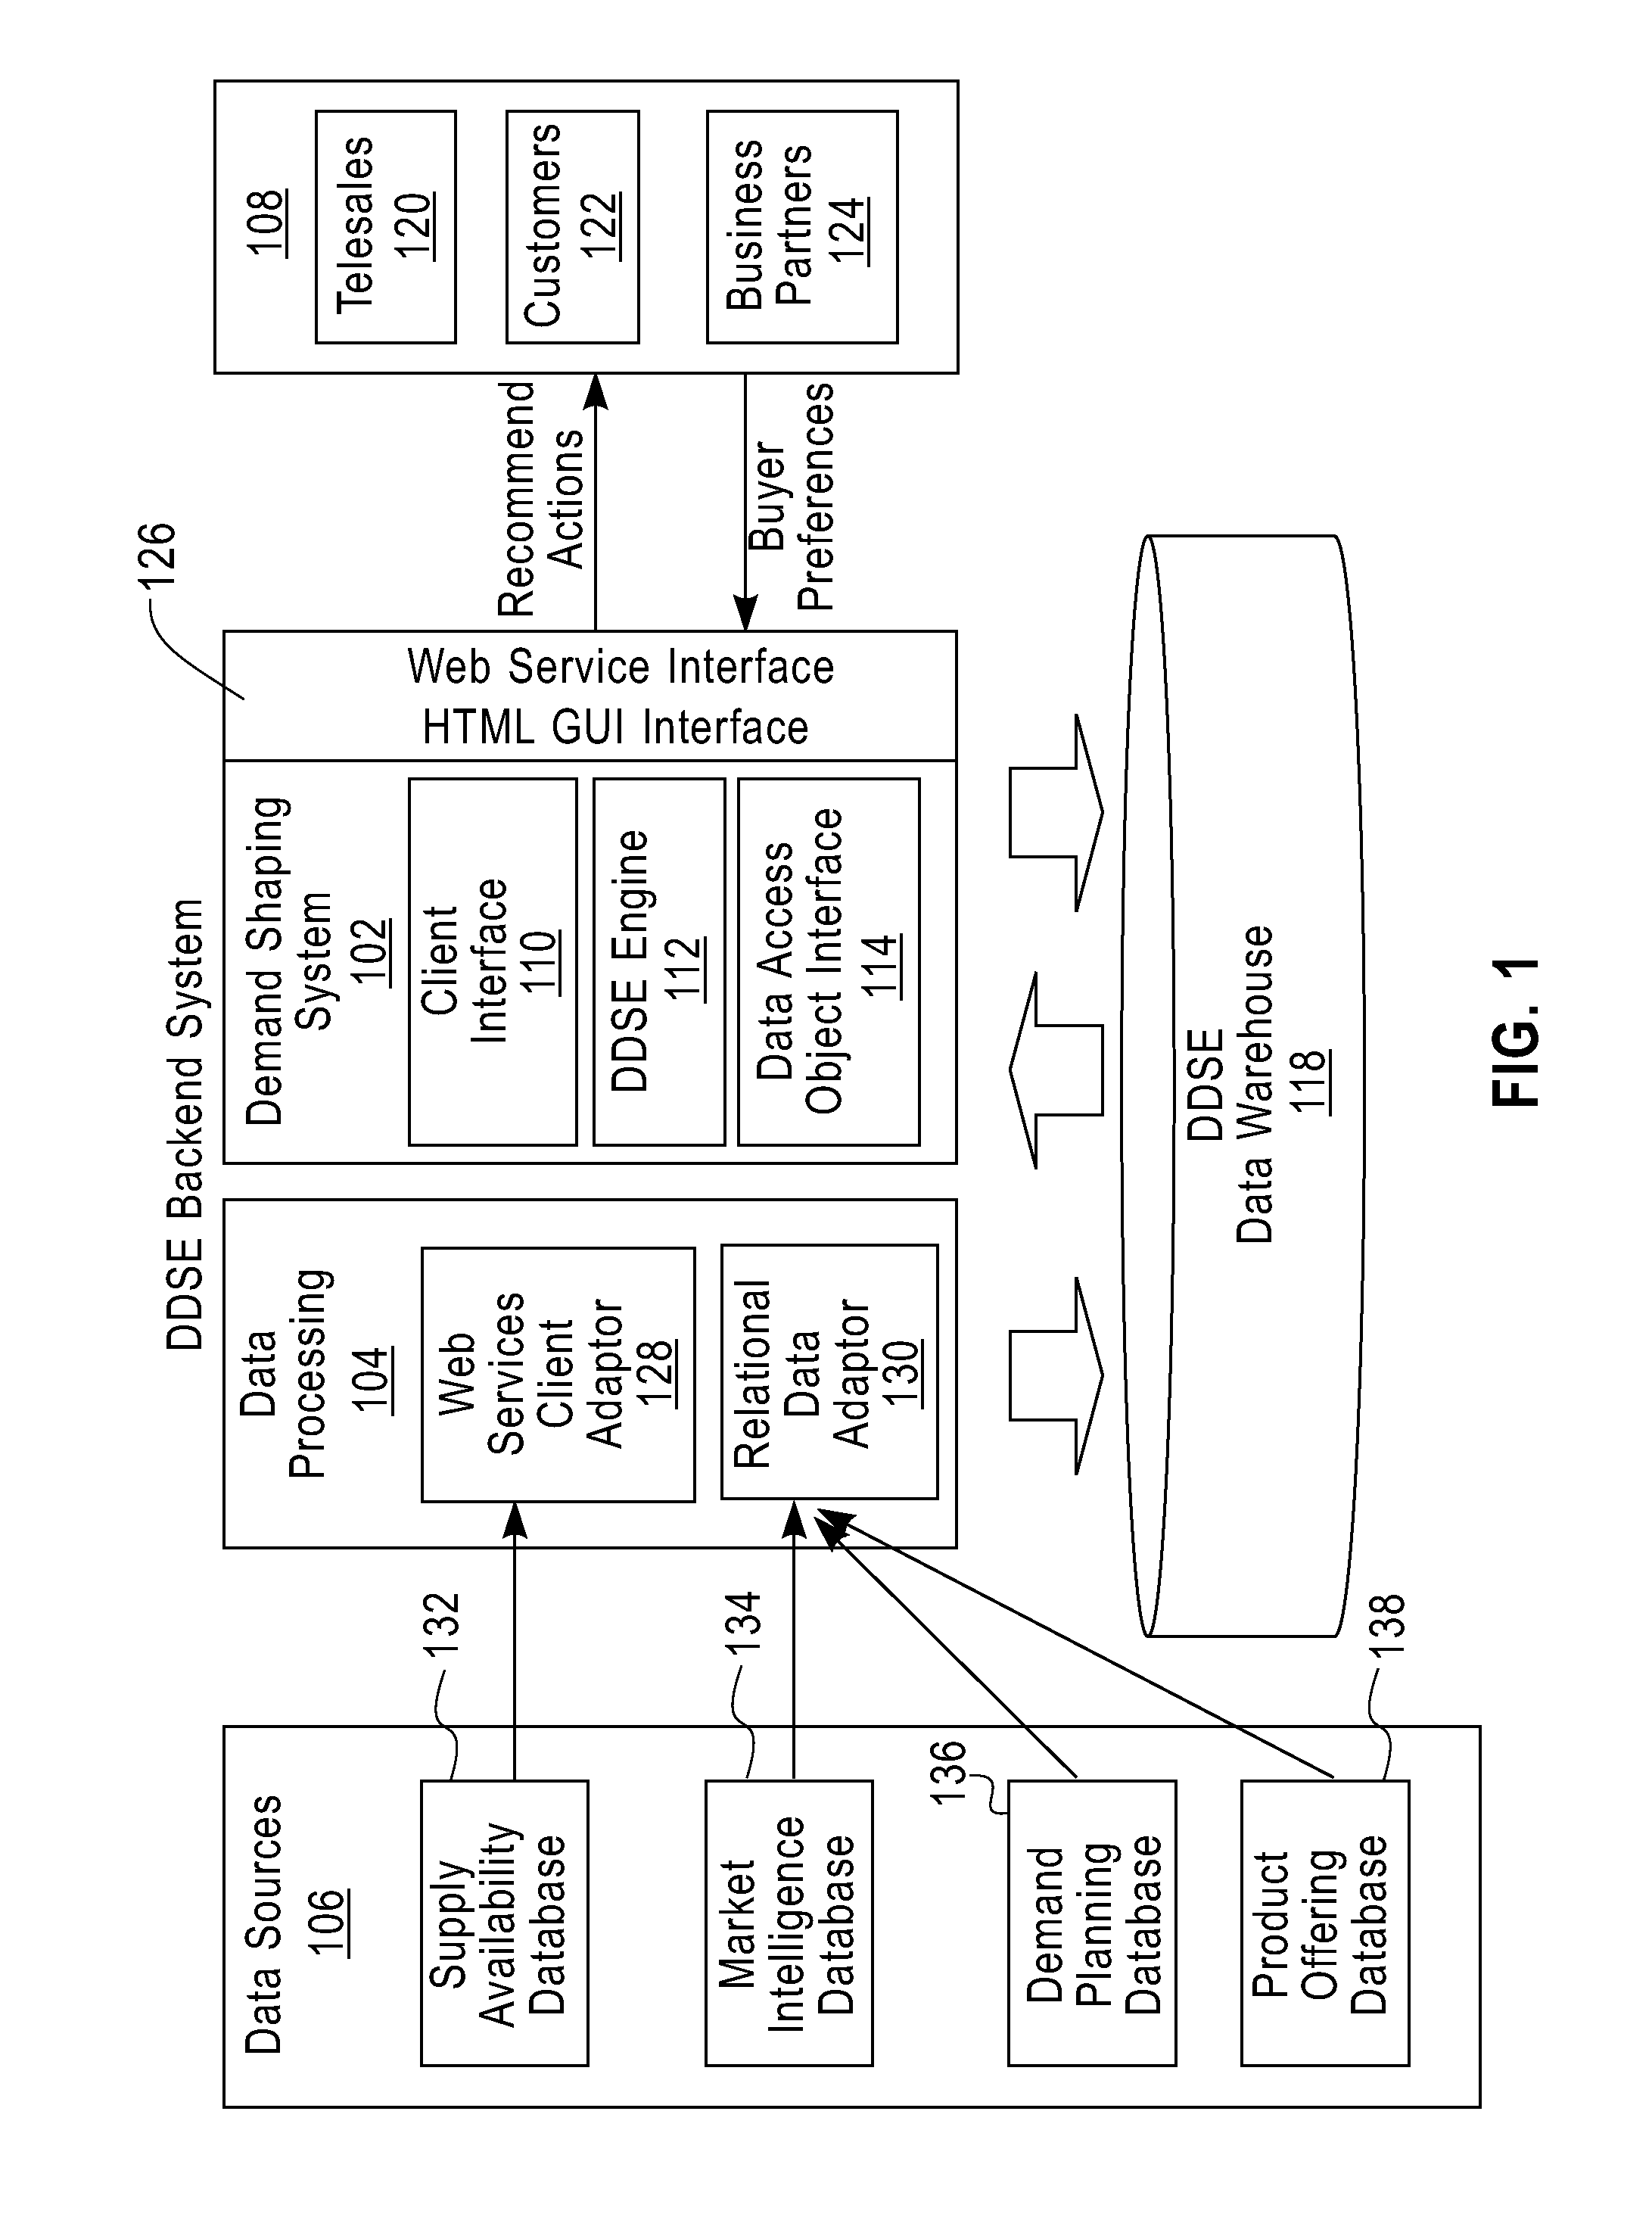 Method and system for evaluating product substitutions along multiple criteria in response to a sales opportunity